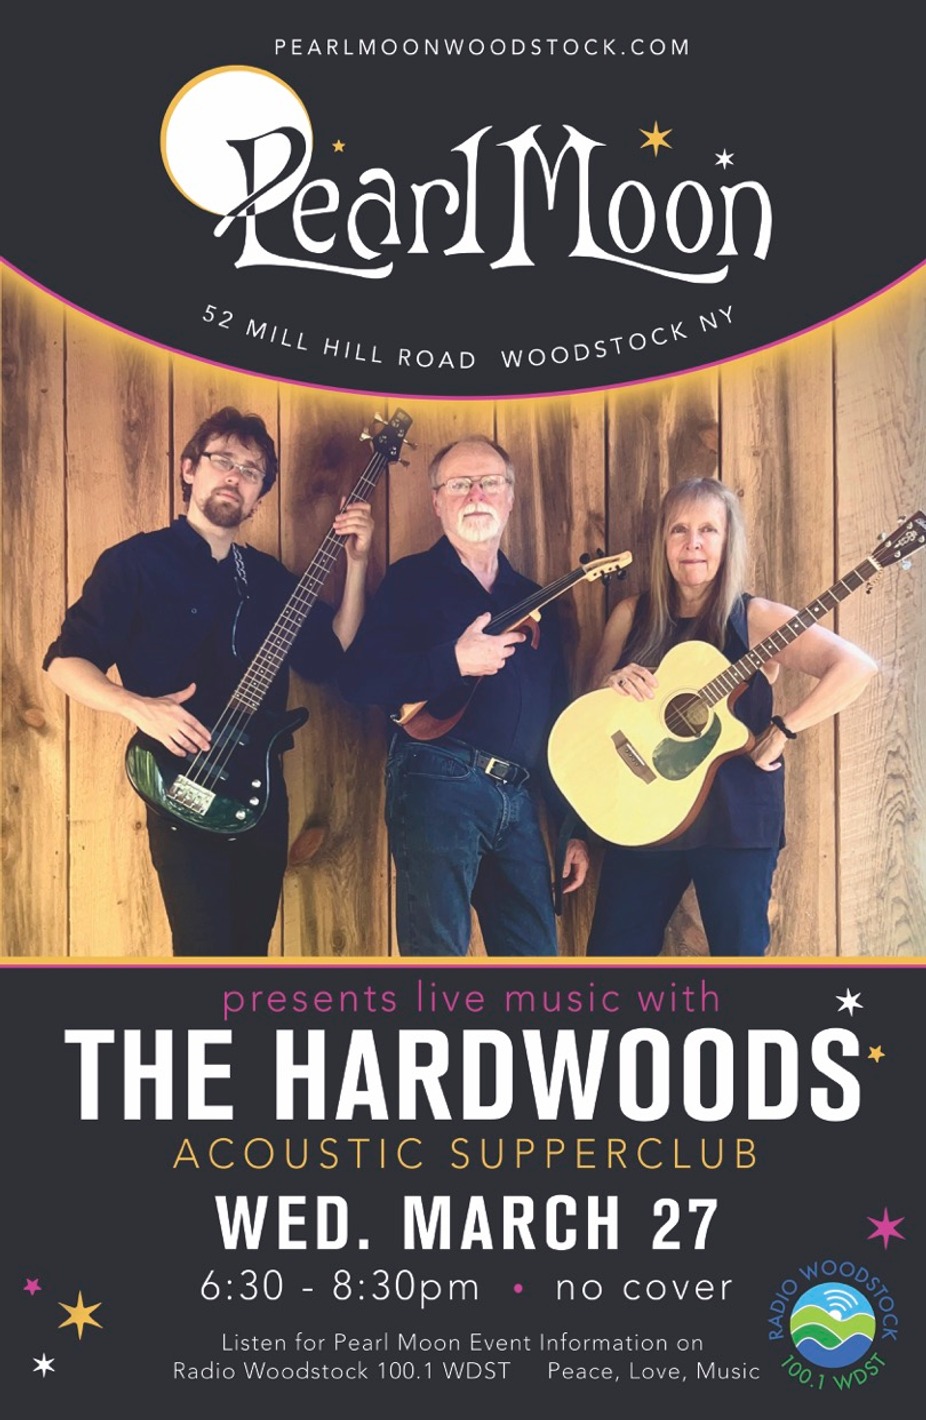 THE HARDWOODS at PEARL MOON WOODSTOCK event photo